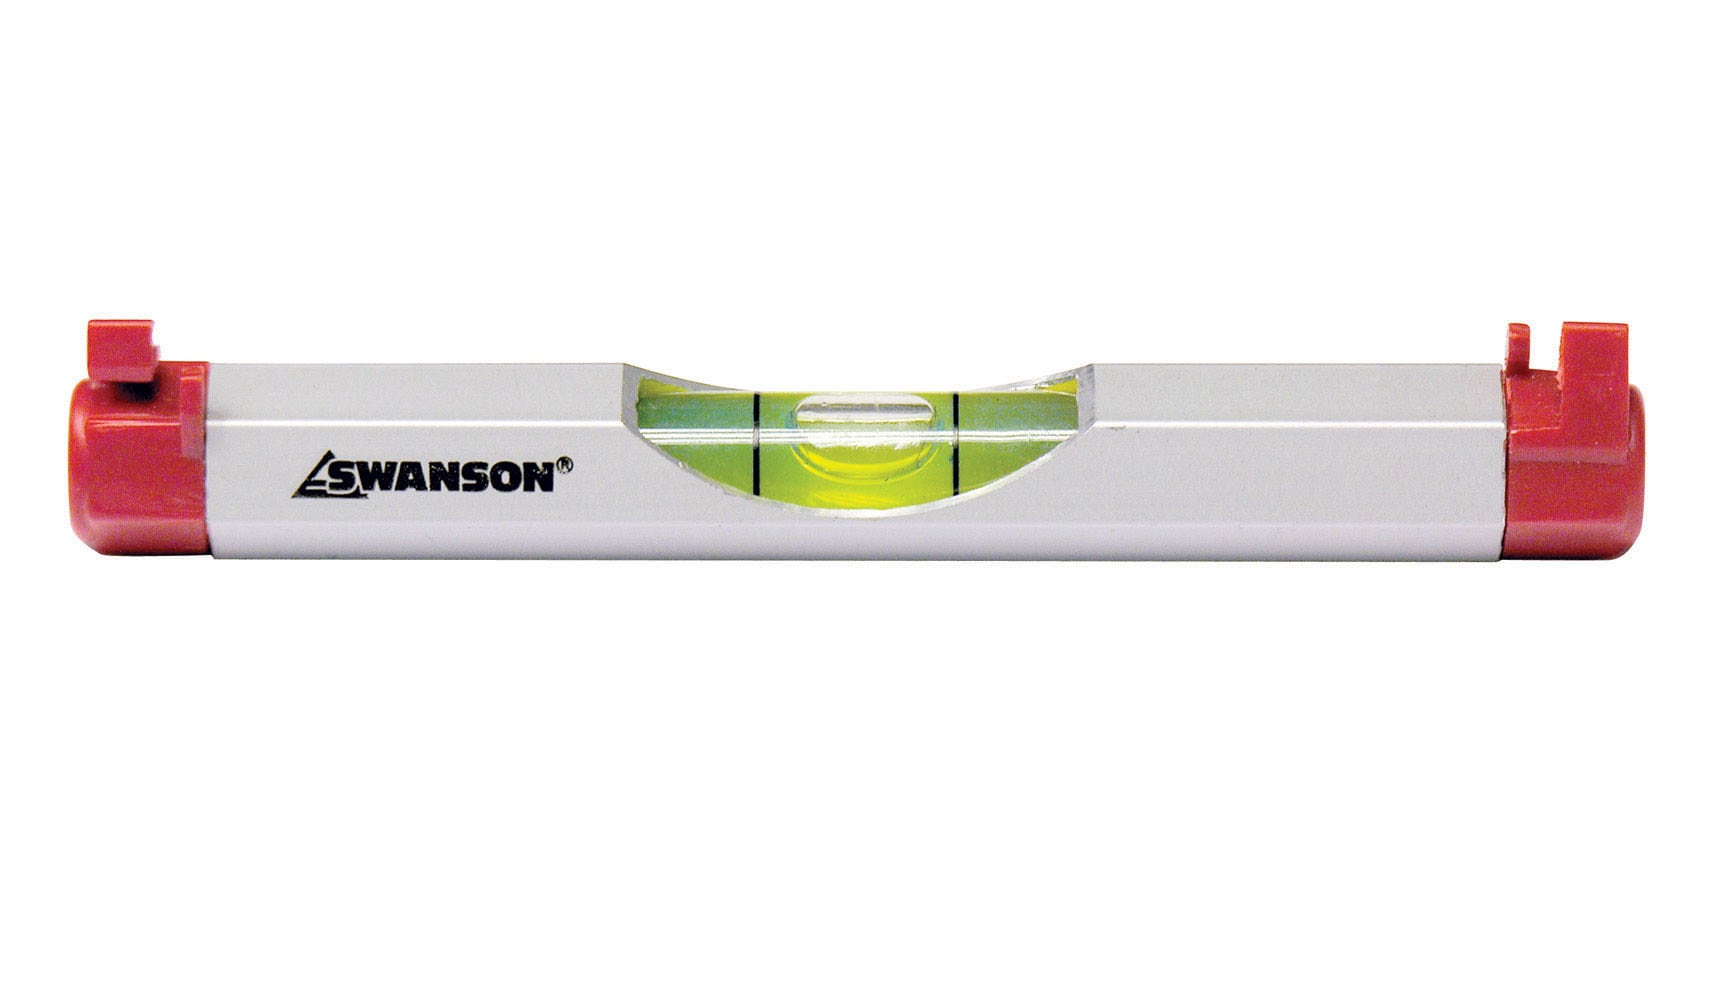 Swanson Tool Company Aluminum 6-in 1 Vial Line/Surface Level at